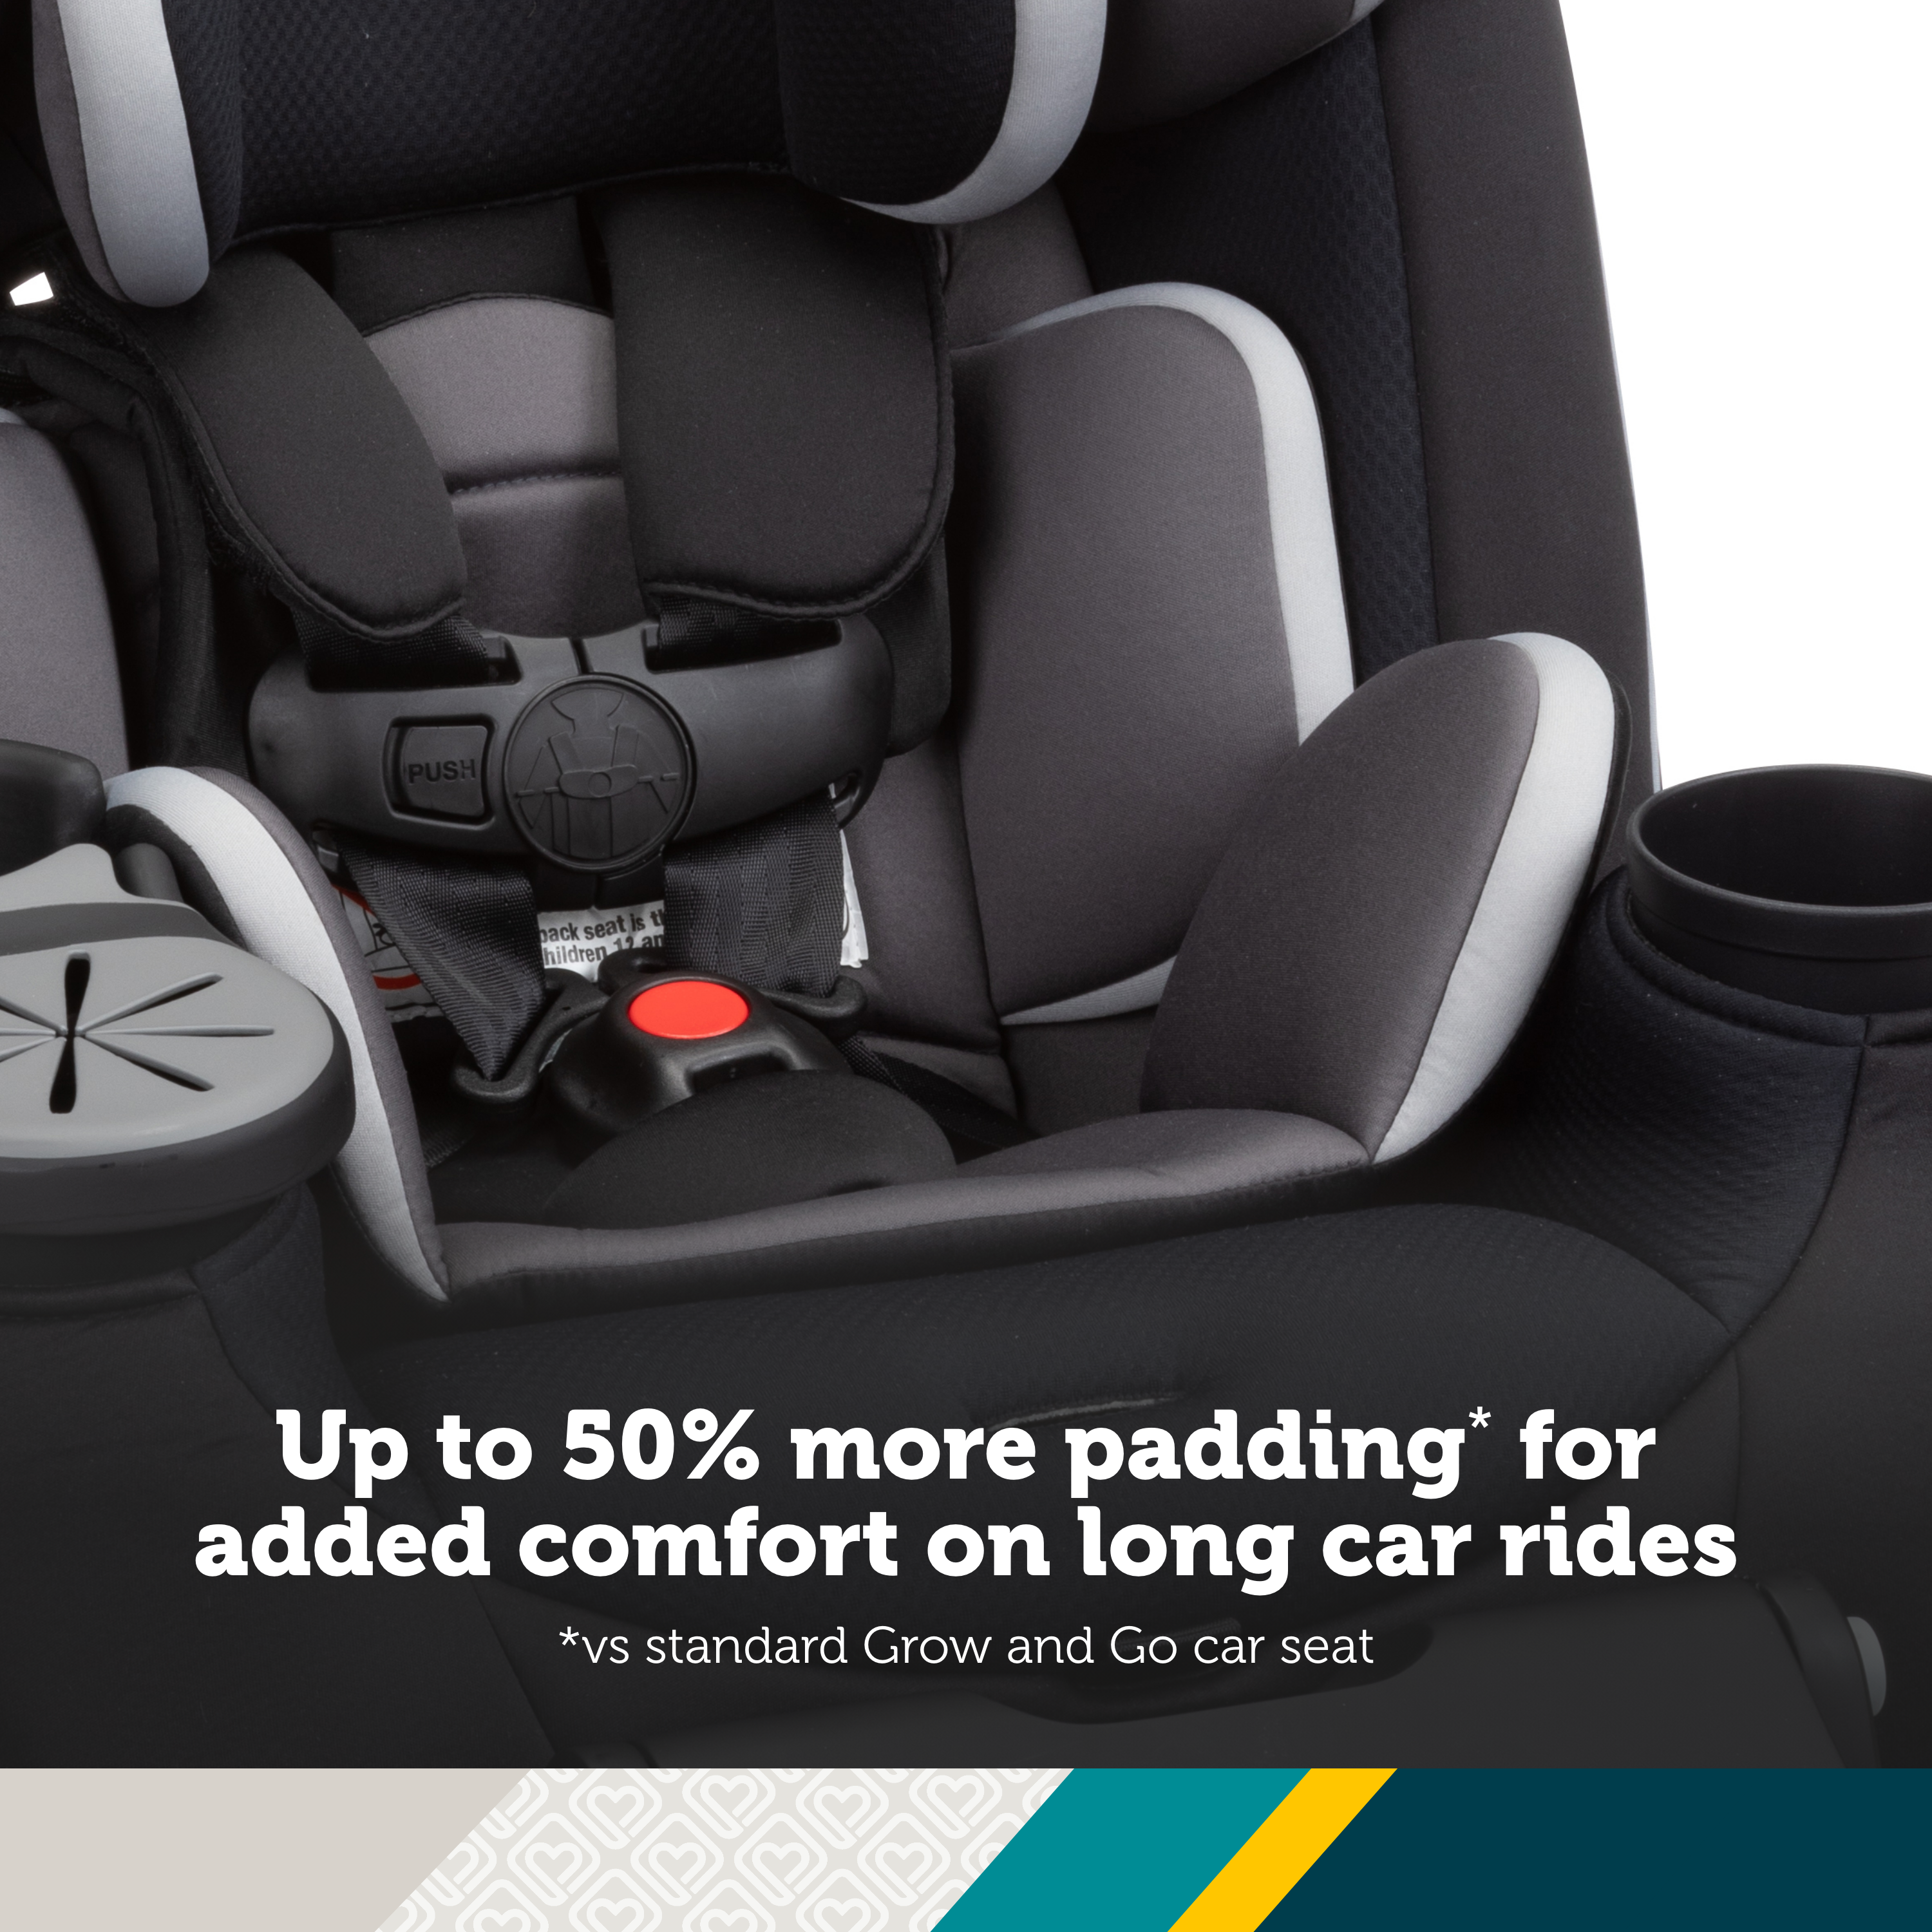 Grow and Go™ Extend 'n Ride LX All-in-One Convertible Car Seat - up to 50% more padding (vs standard Grow and Go car seat) for added comfort on long car rides